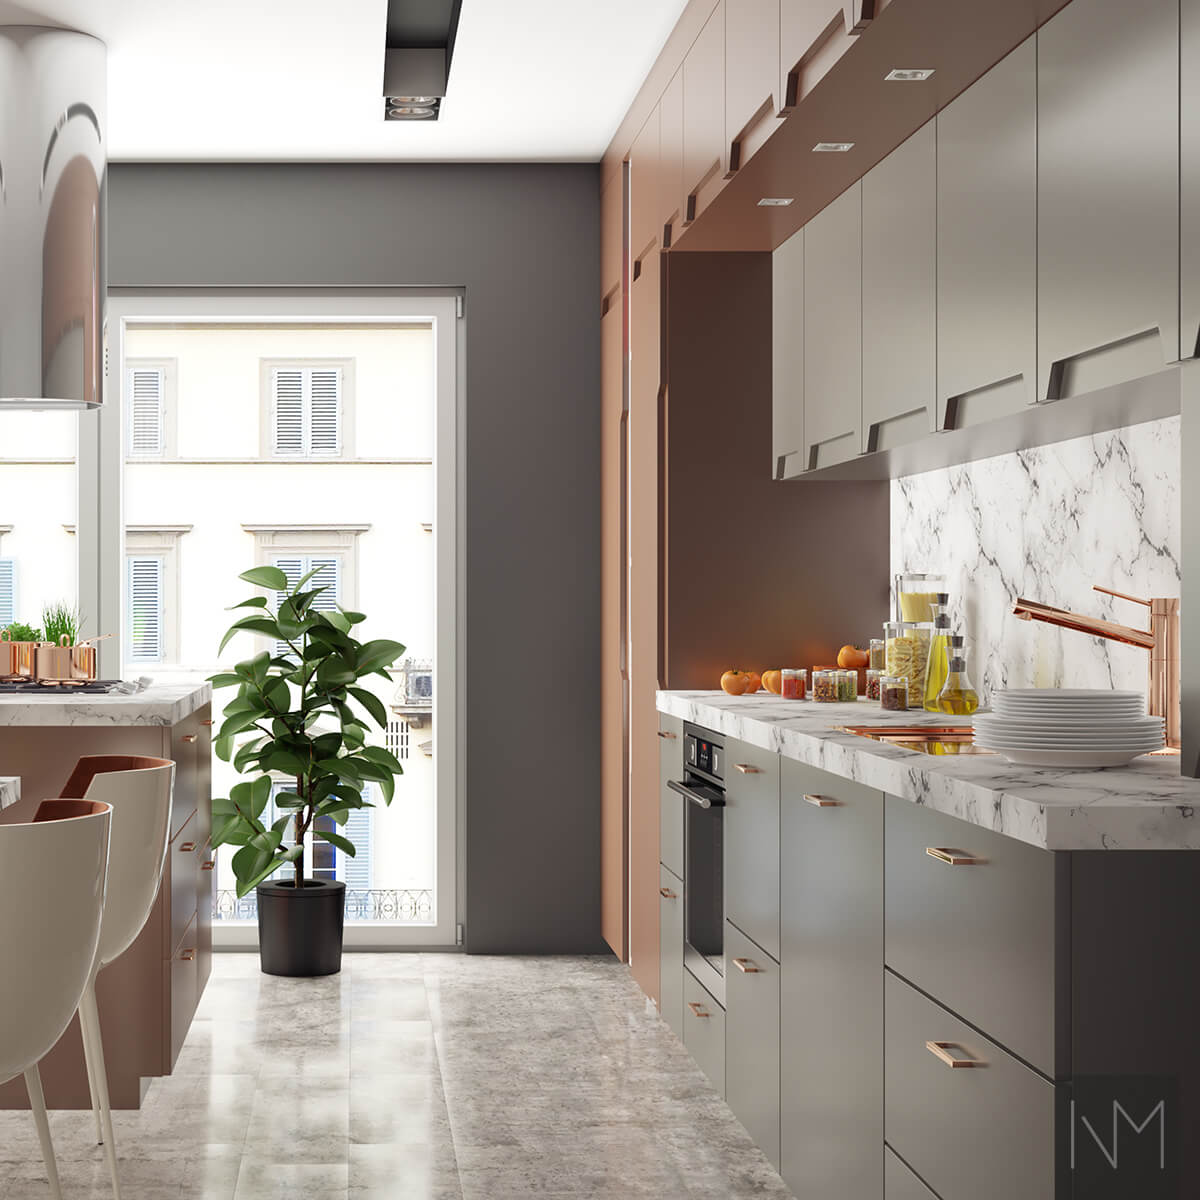 IKEA Metod or Faktum kitchen Elegance. Colours 3918-Y55R or Savanna Sunset 20046 and 1002-Y24R or Smoke 1376